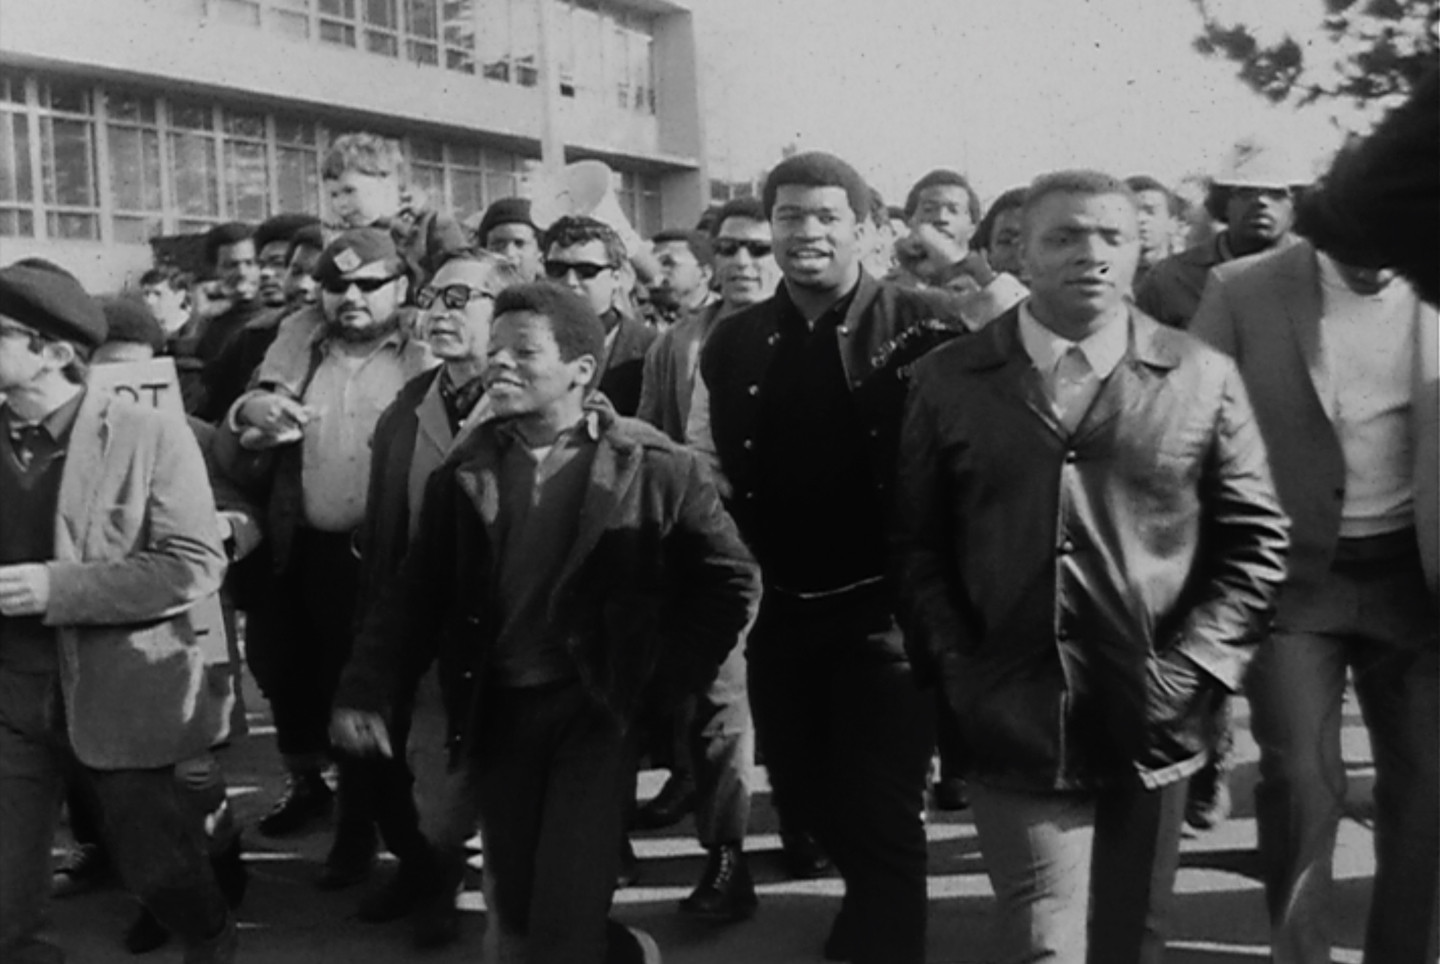 A group of community leaders march in solidarity with the Black Students Union at San Francisco State on Dec. 4, 1968.